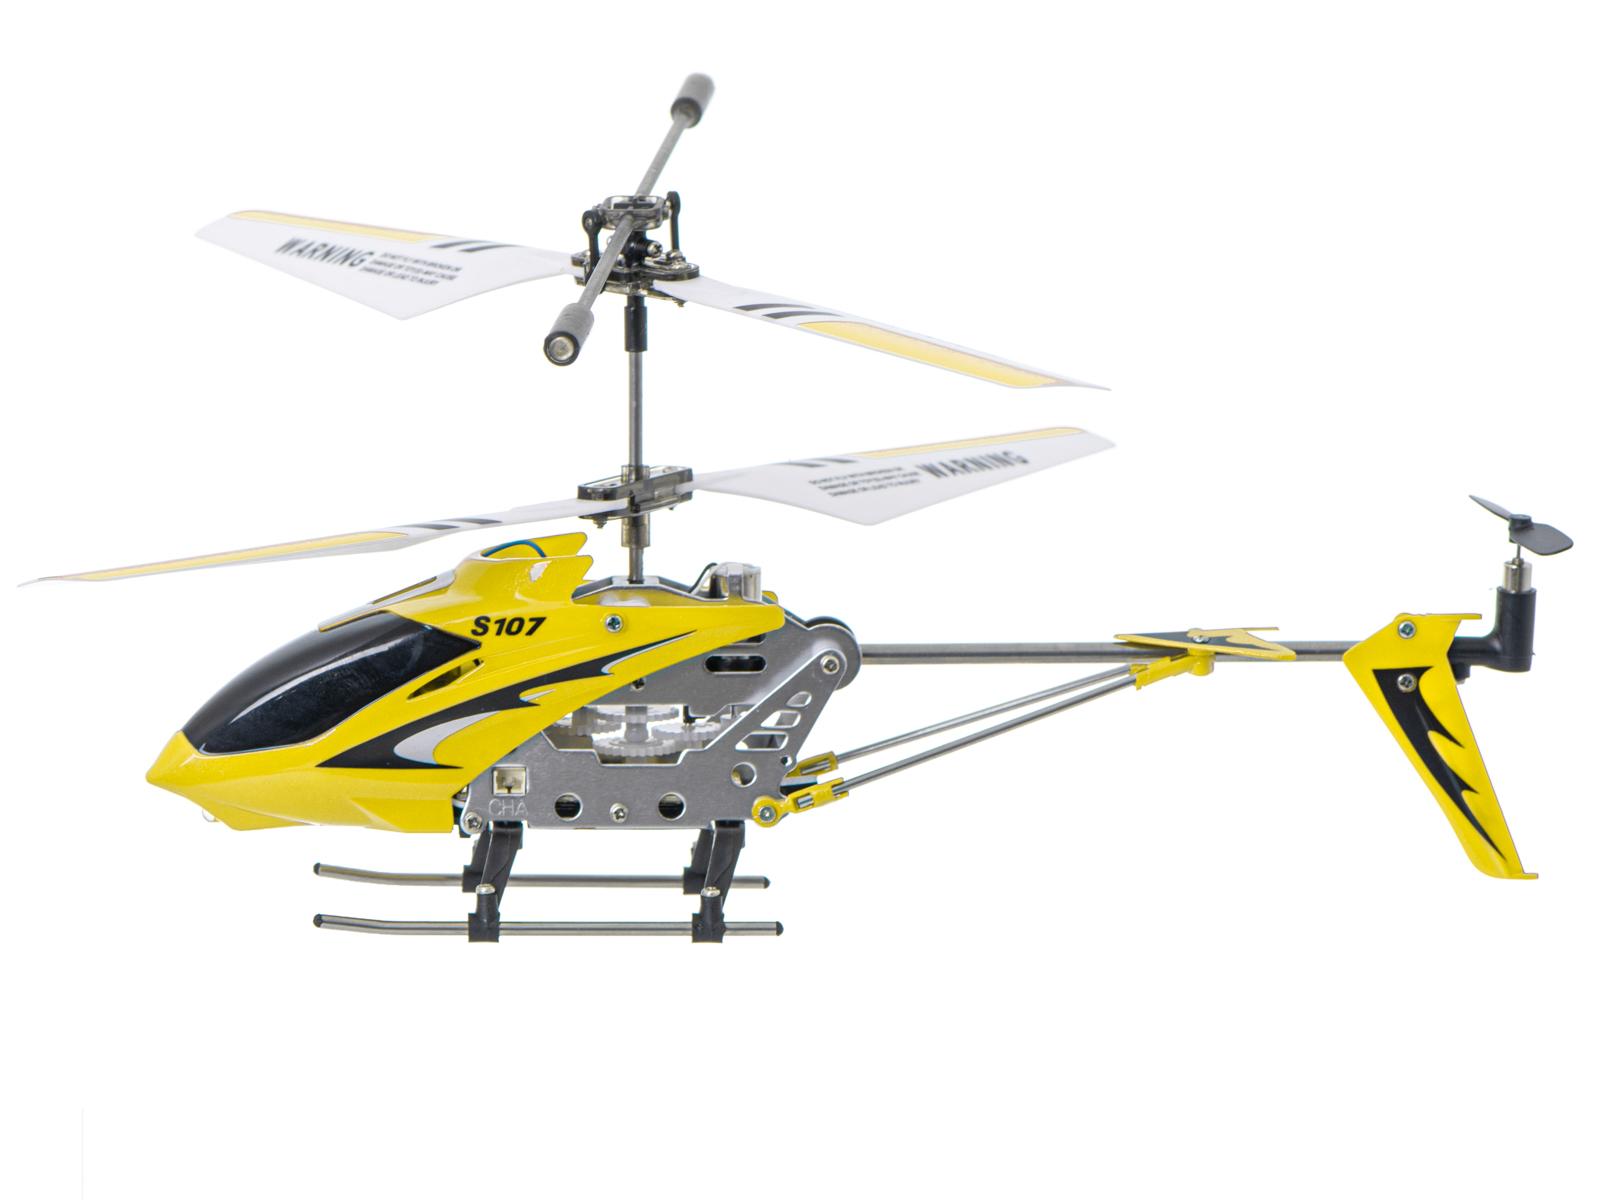 Best Mini Helicopter Rc: Top Features of the Syma S107G Mini Helicopter RC